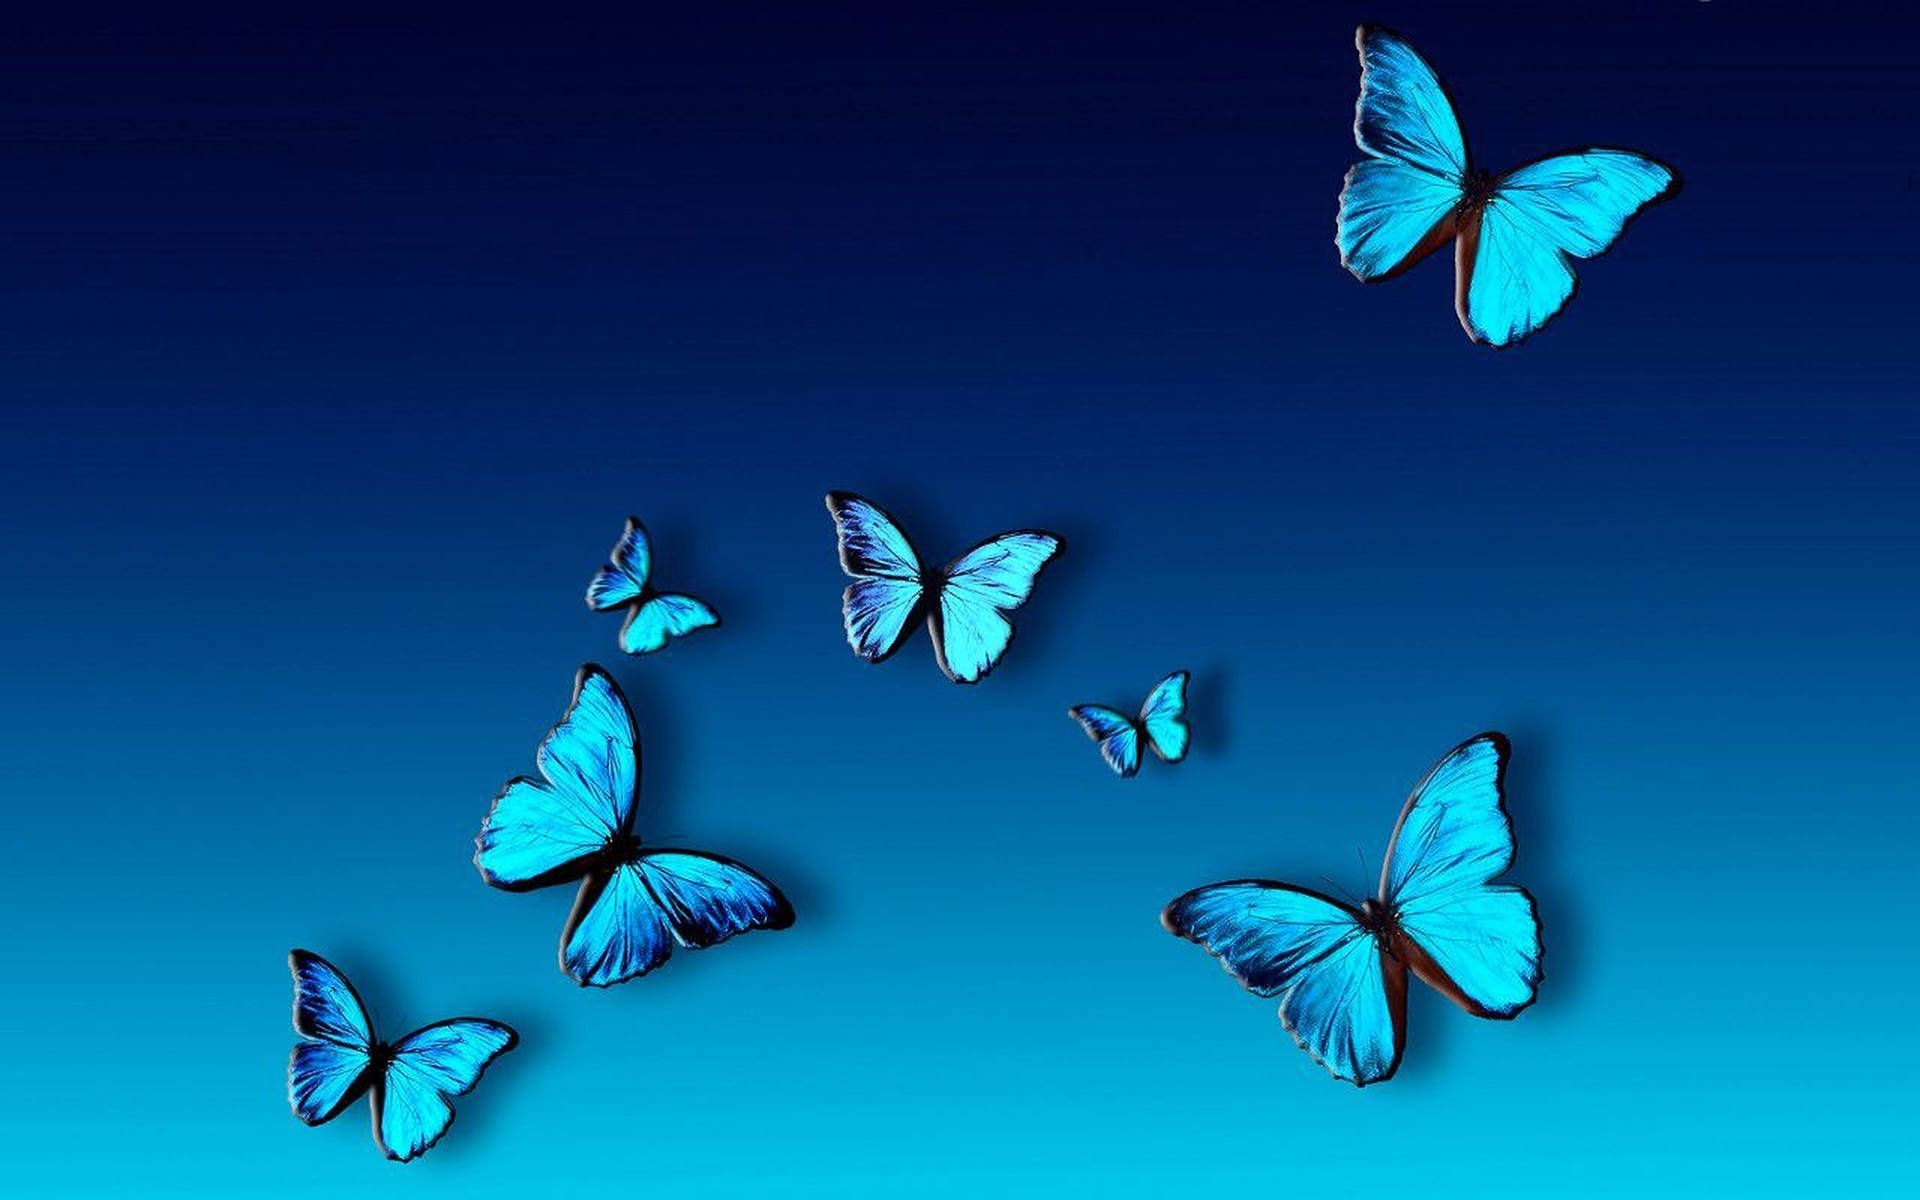 A group of blue butterflies flying in the sky - Butterfly